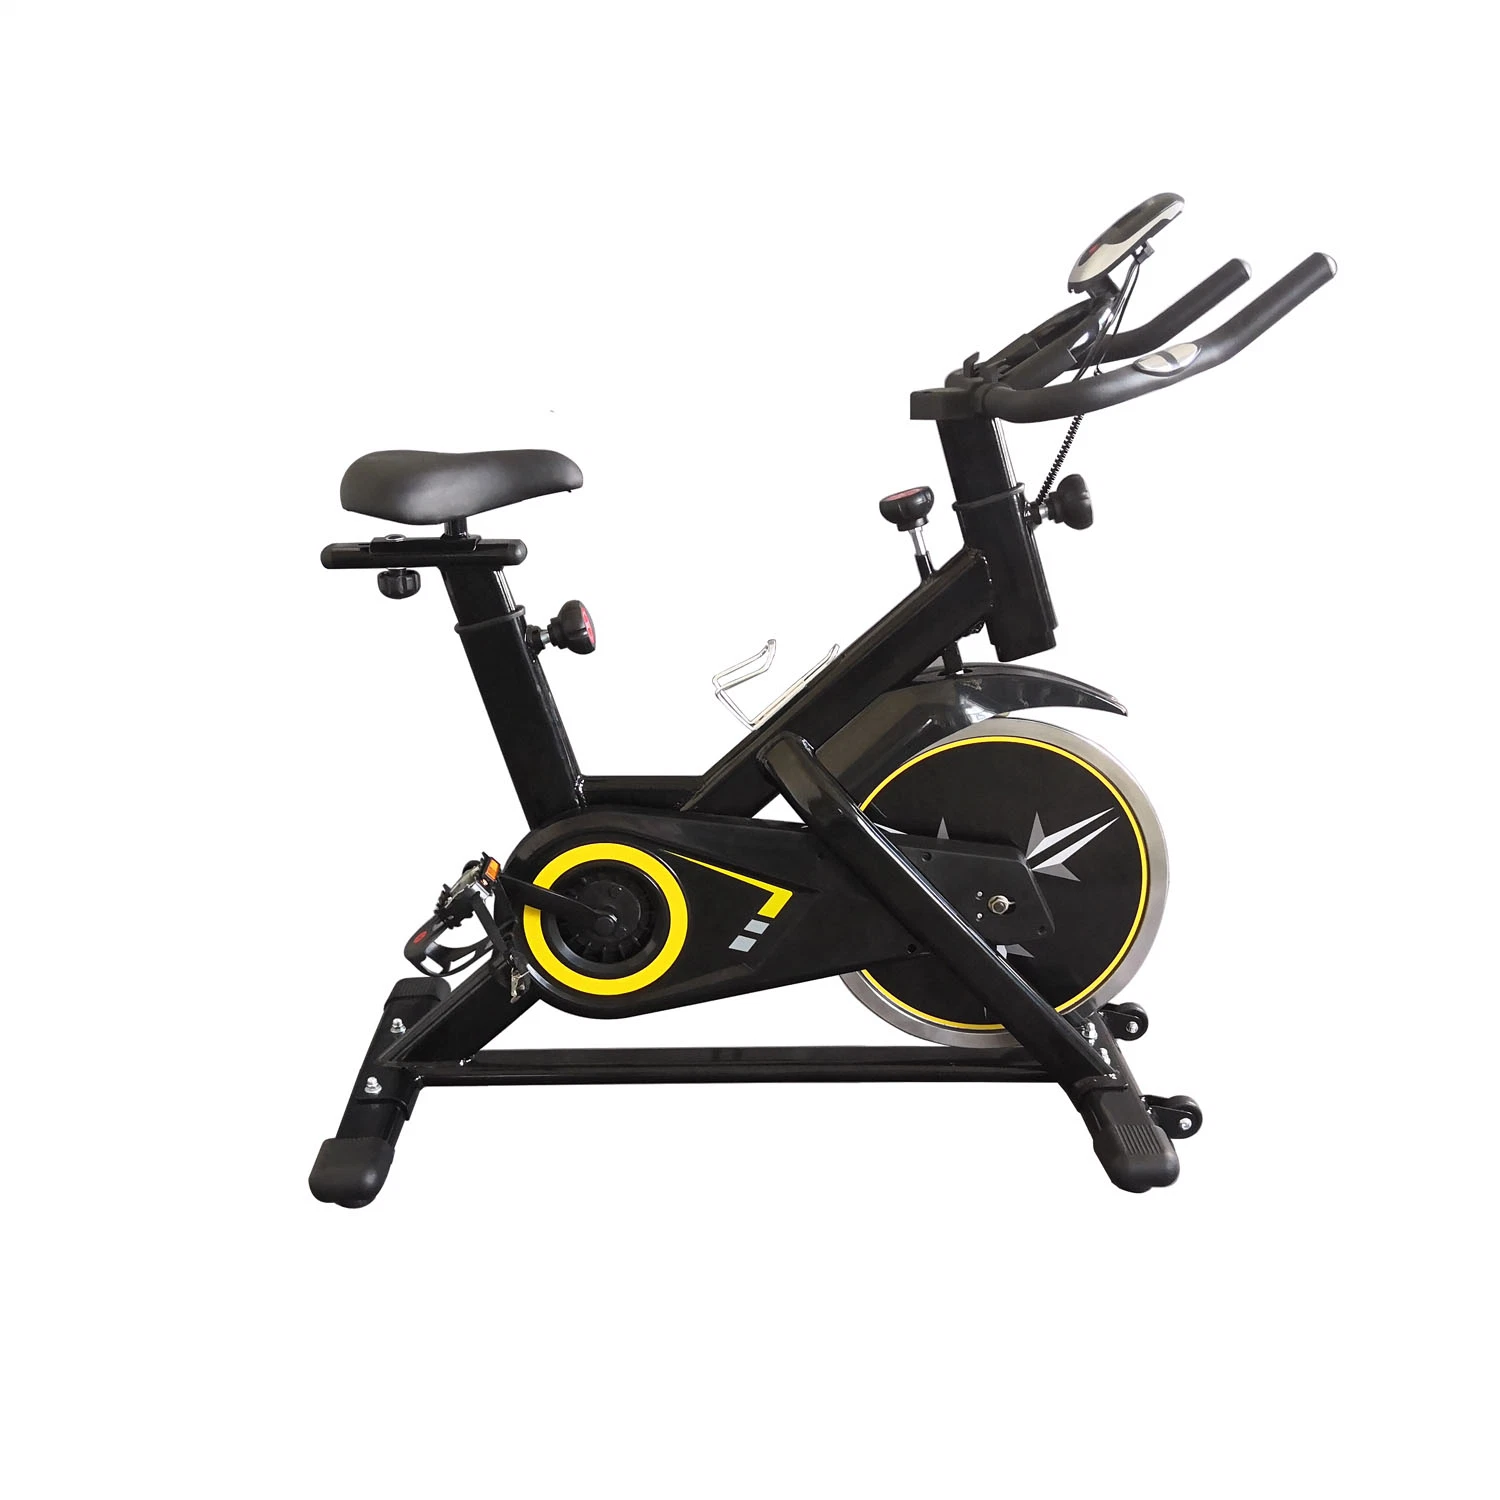 New Indoor Training Home Gym Fitness Equipment Exercise Machine Magnetic Spinning Exercise Home Fitness Spin Bike Sports Bike